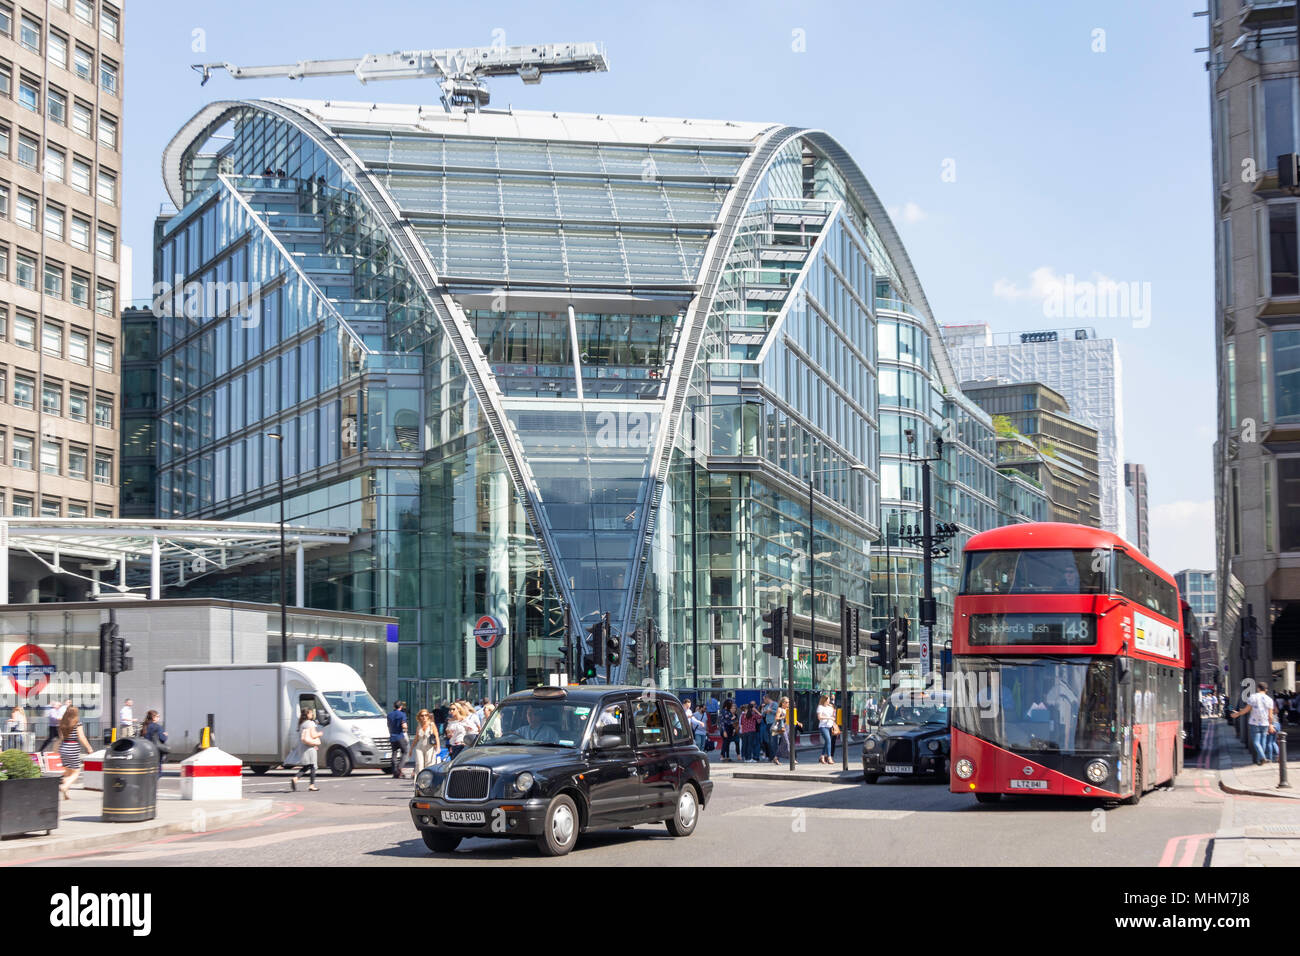 Cardinal Place Shopping Centre, Victoria Street, Victoria, City of Westminster, Greater London, England, United Kingdom Stock Photo